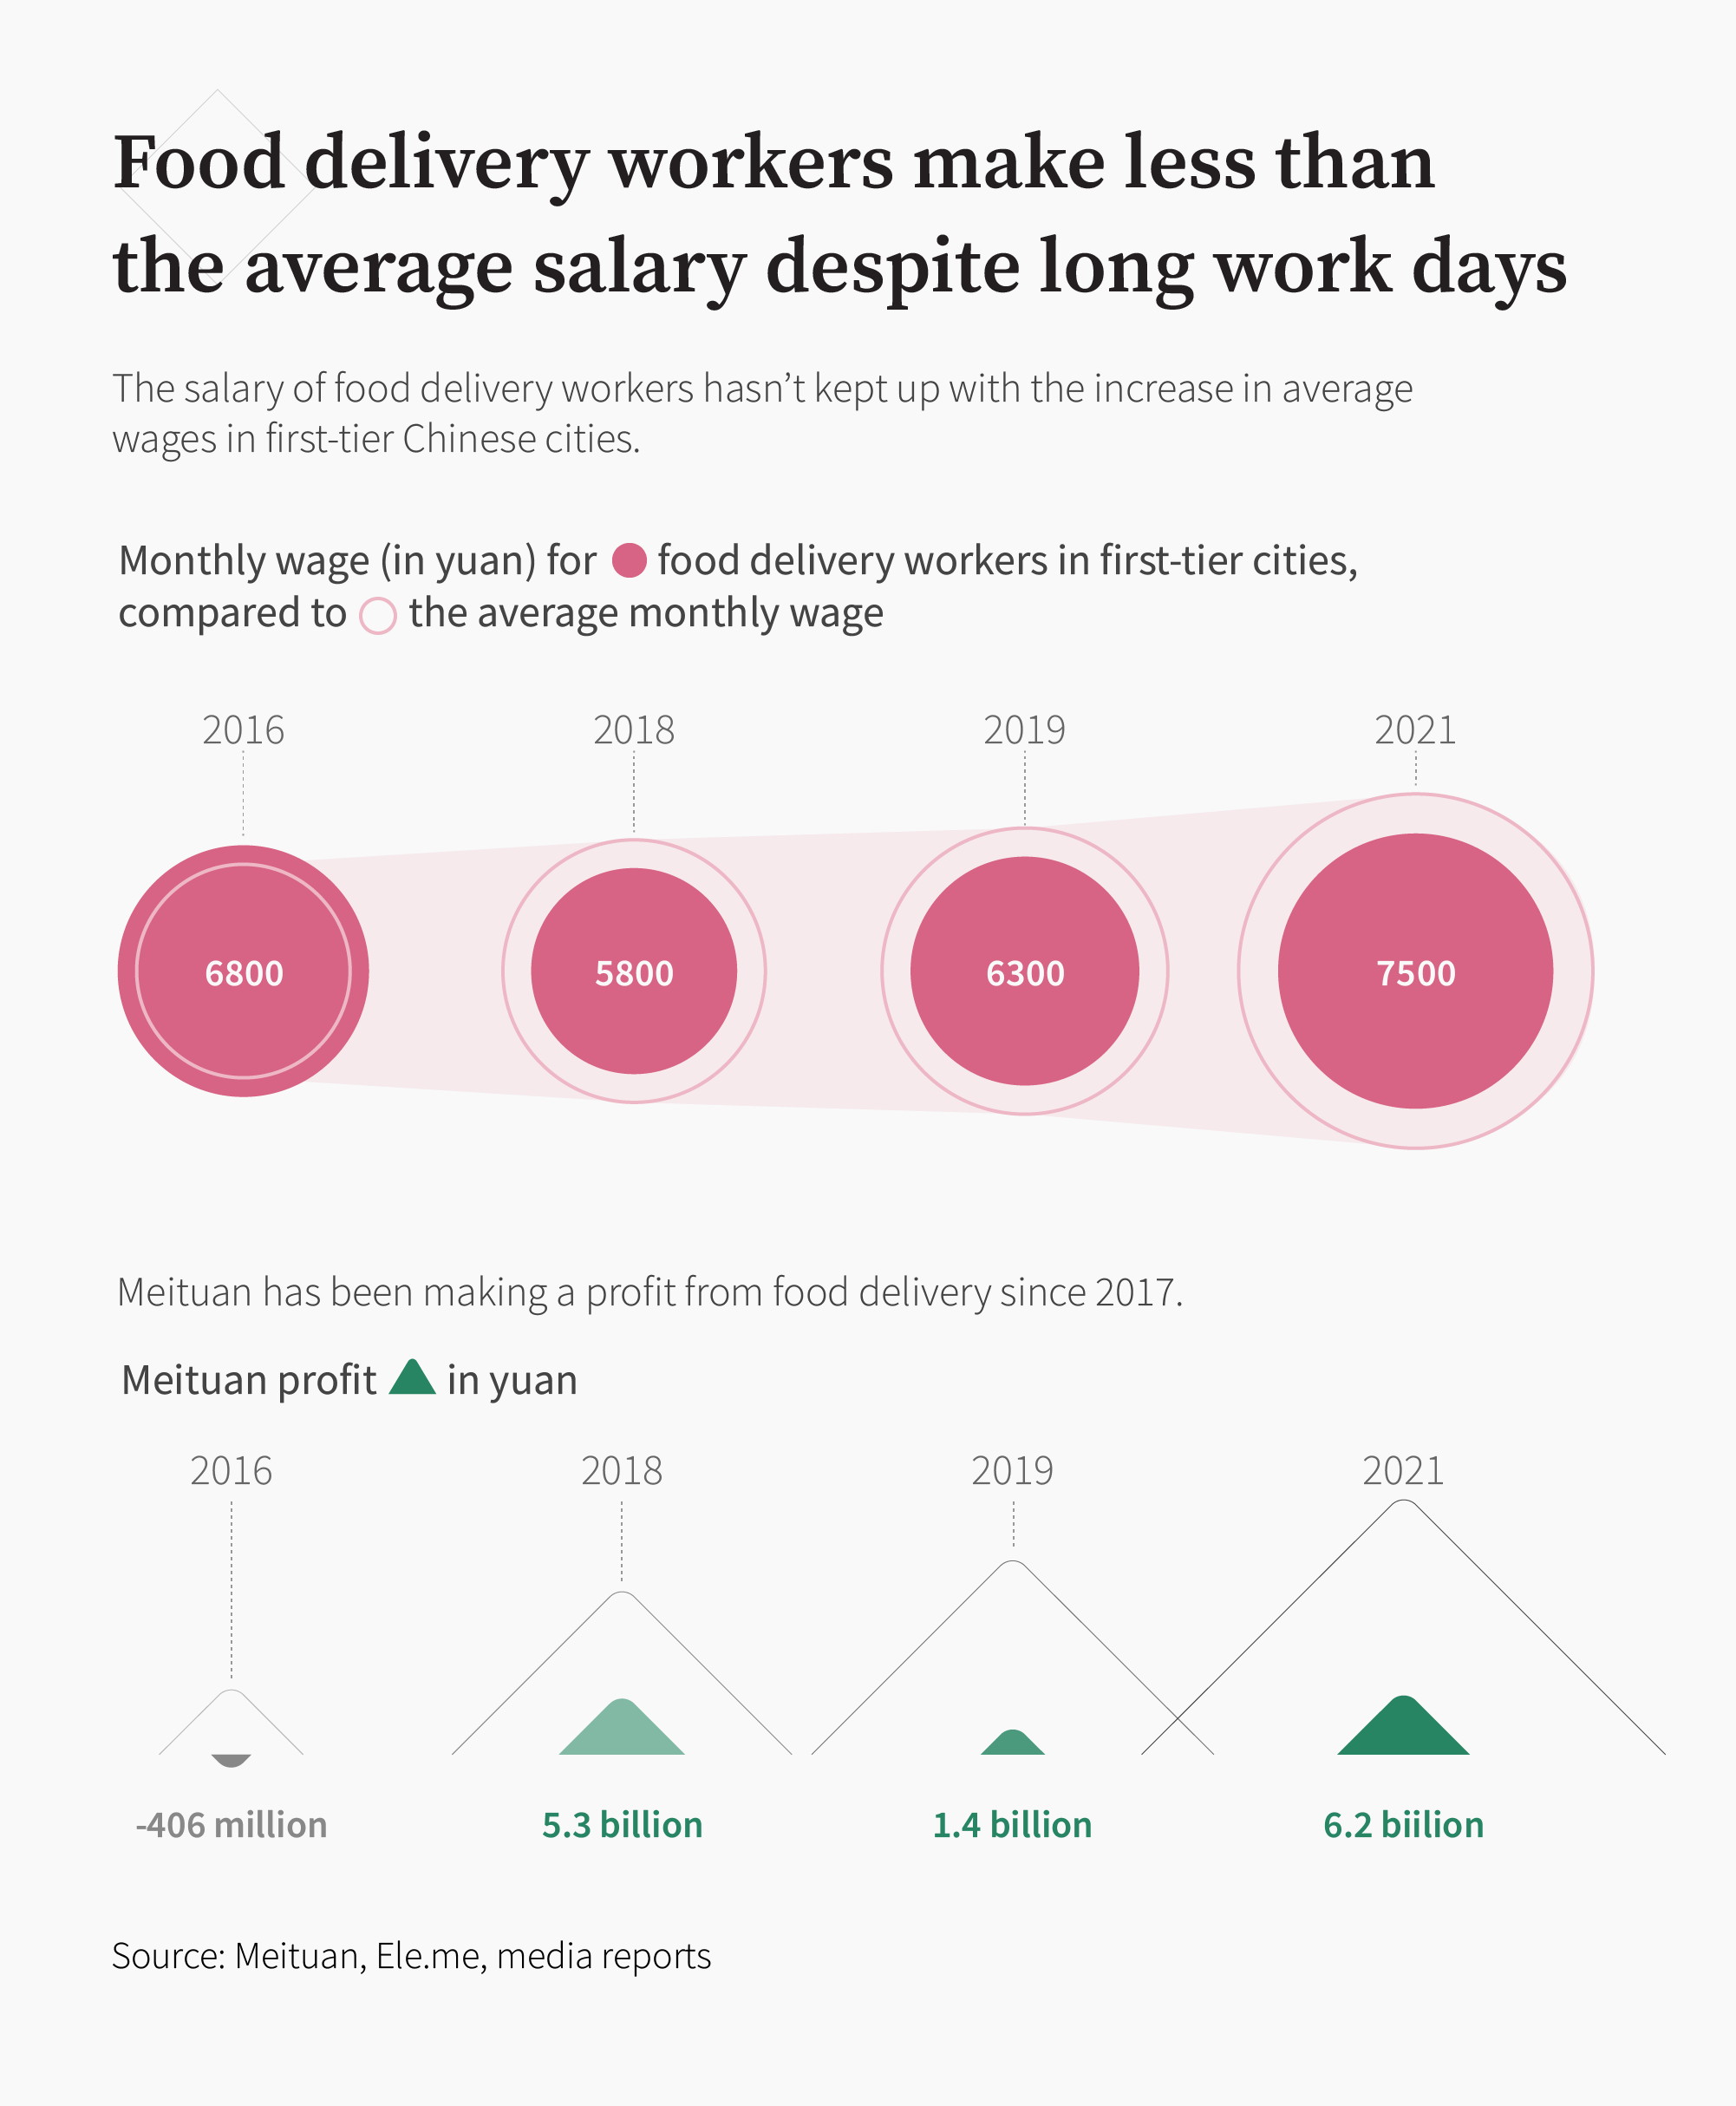 A CLB graphic shows the average wages of food delivery riders in China's first-tier cities, compared with average wages, as well as Meituan's profit growth, between 2016 and 2021